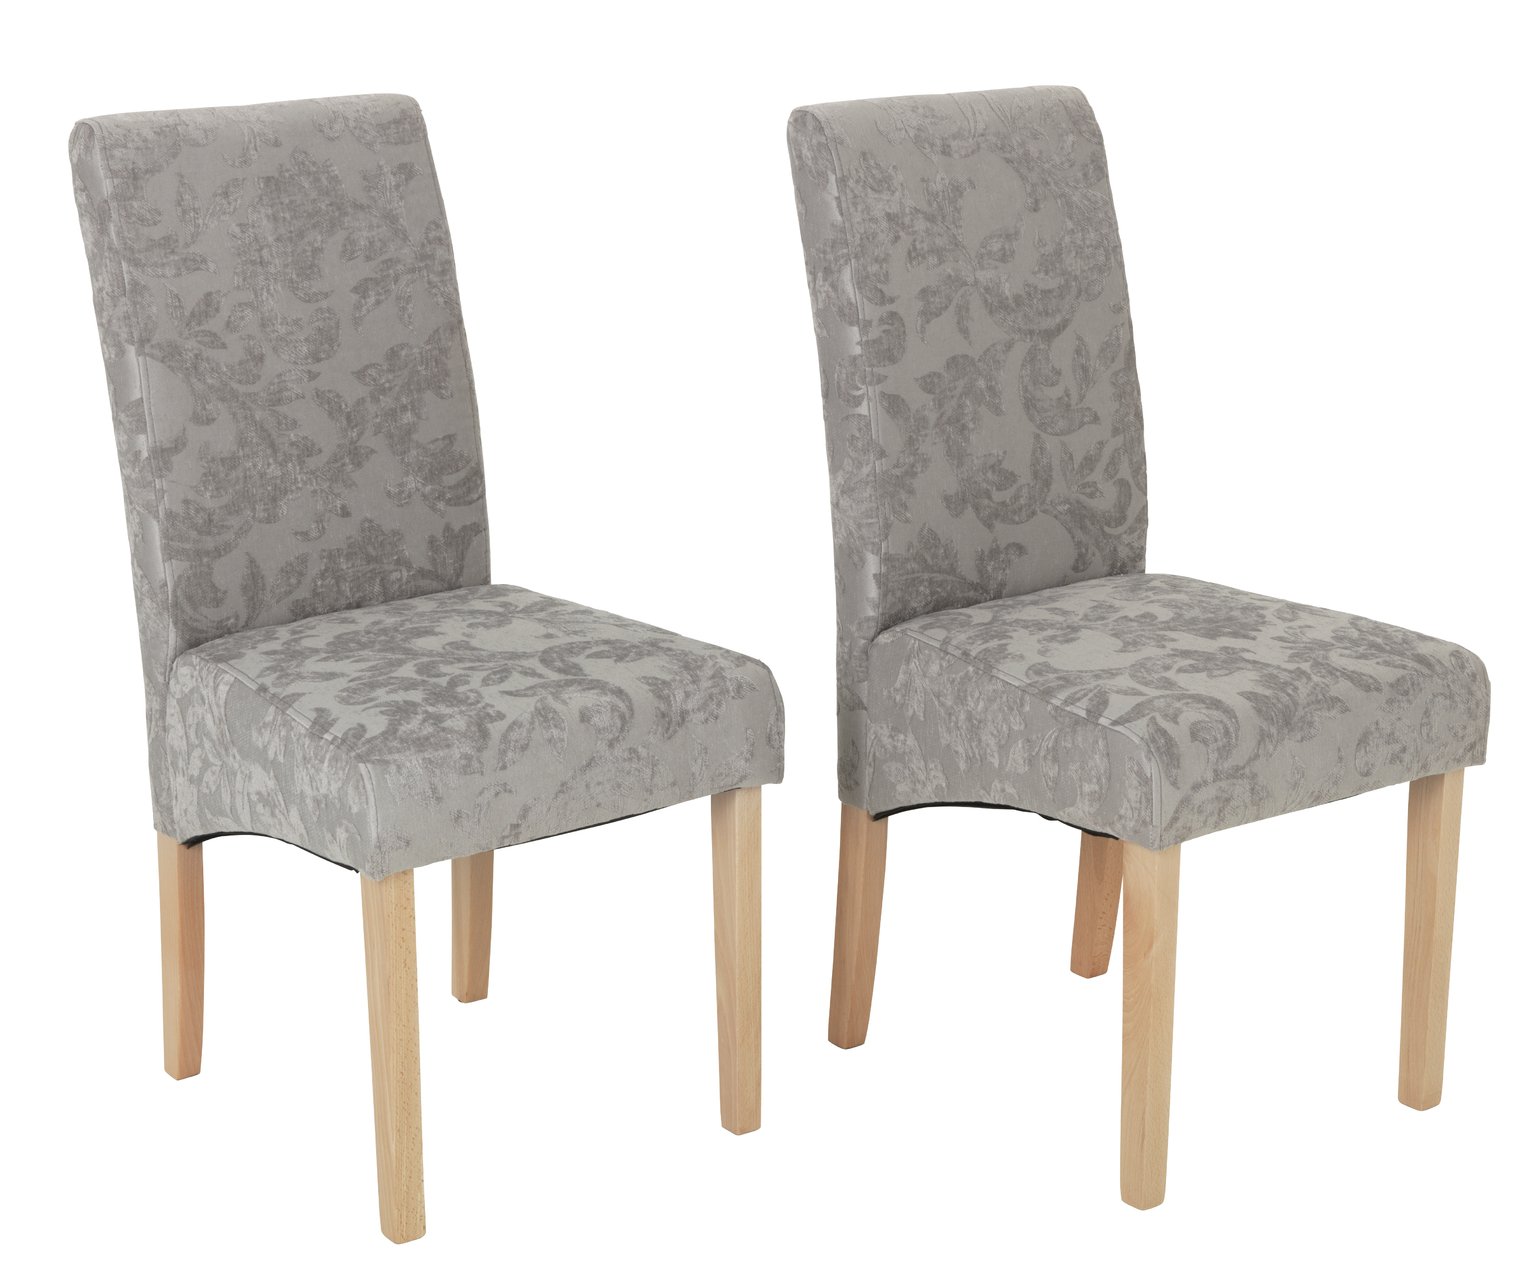 Argos Home Pair of Skirted Dining Chairs - Damask Grey